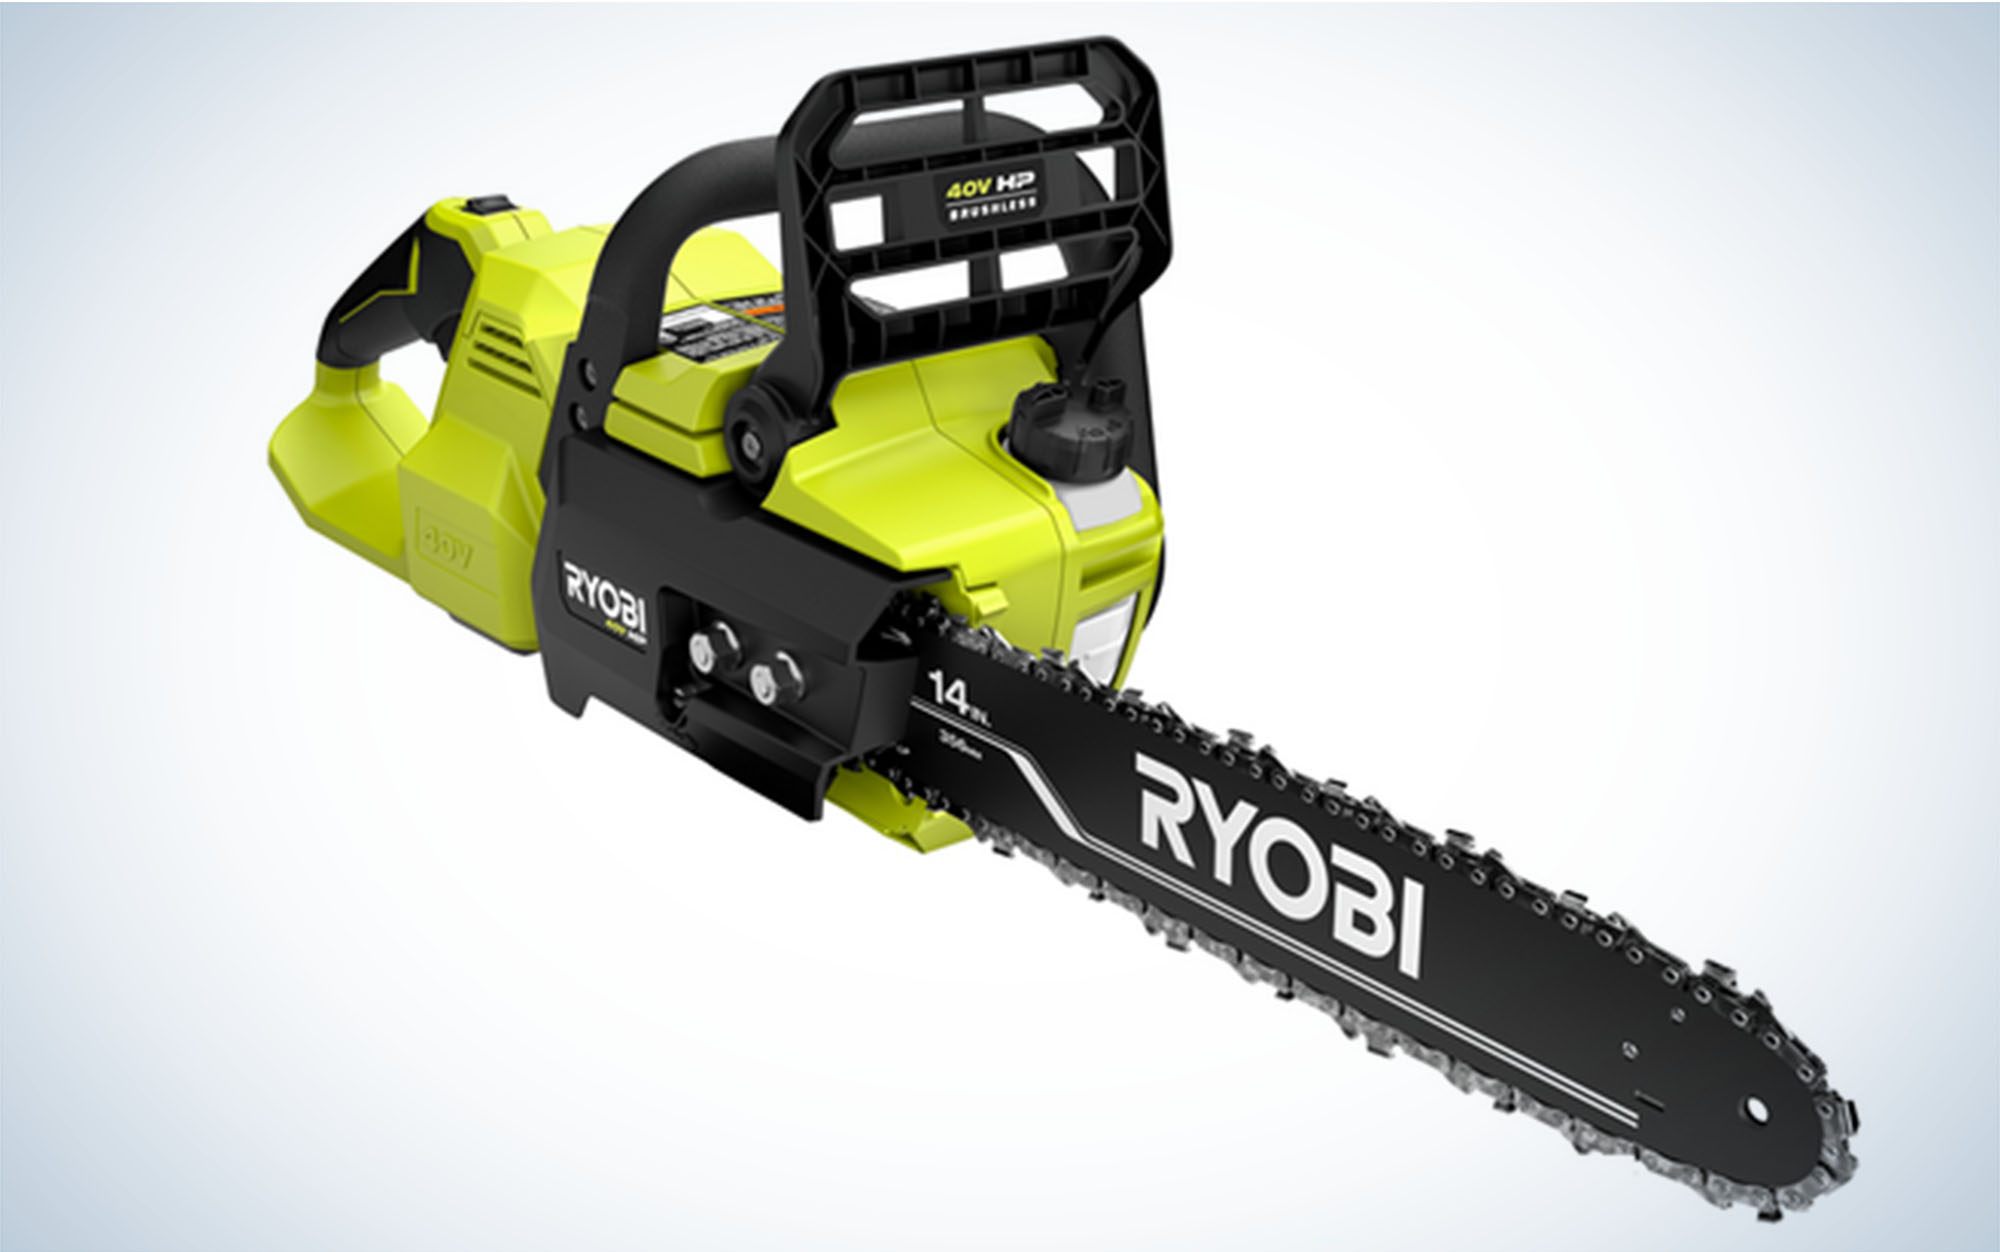 The Ryobi 40V HP is one of the best electric chainsaws.